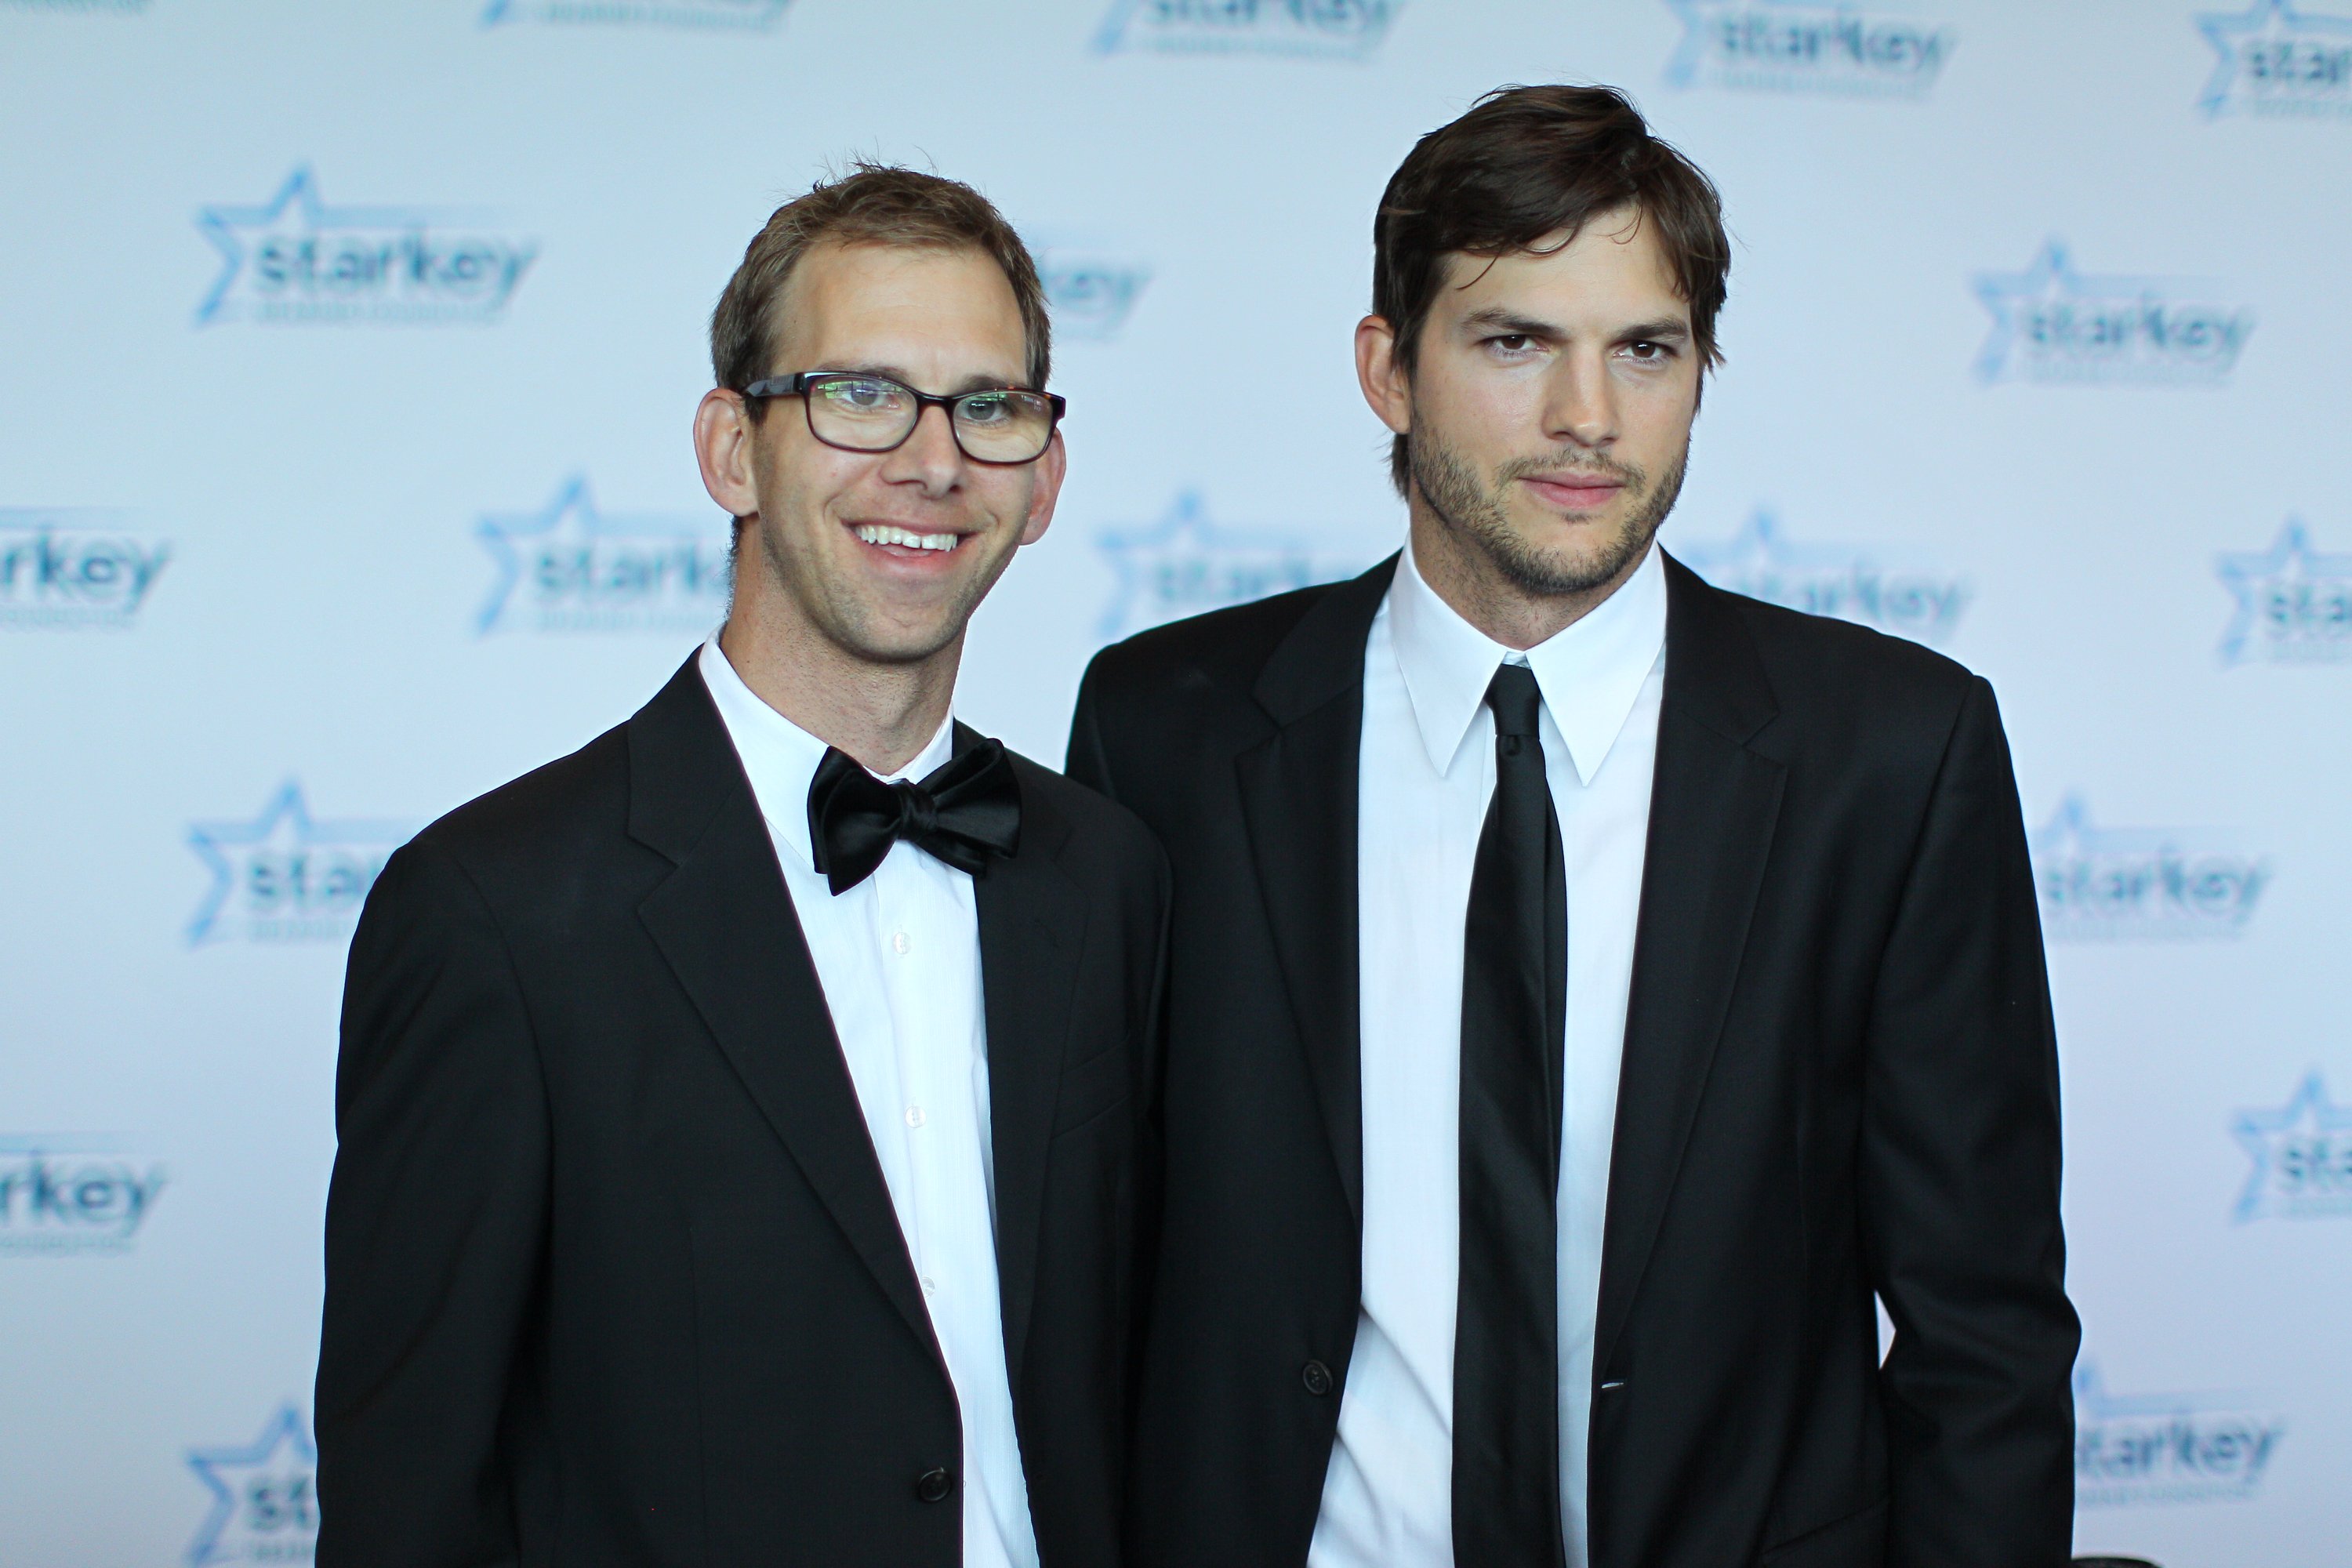 Michael Kutcher and Ashton Kutcher walk the red carpet on July 28, 2013 in St. Paul, Minnesota. | Photo: Getty Images